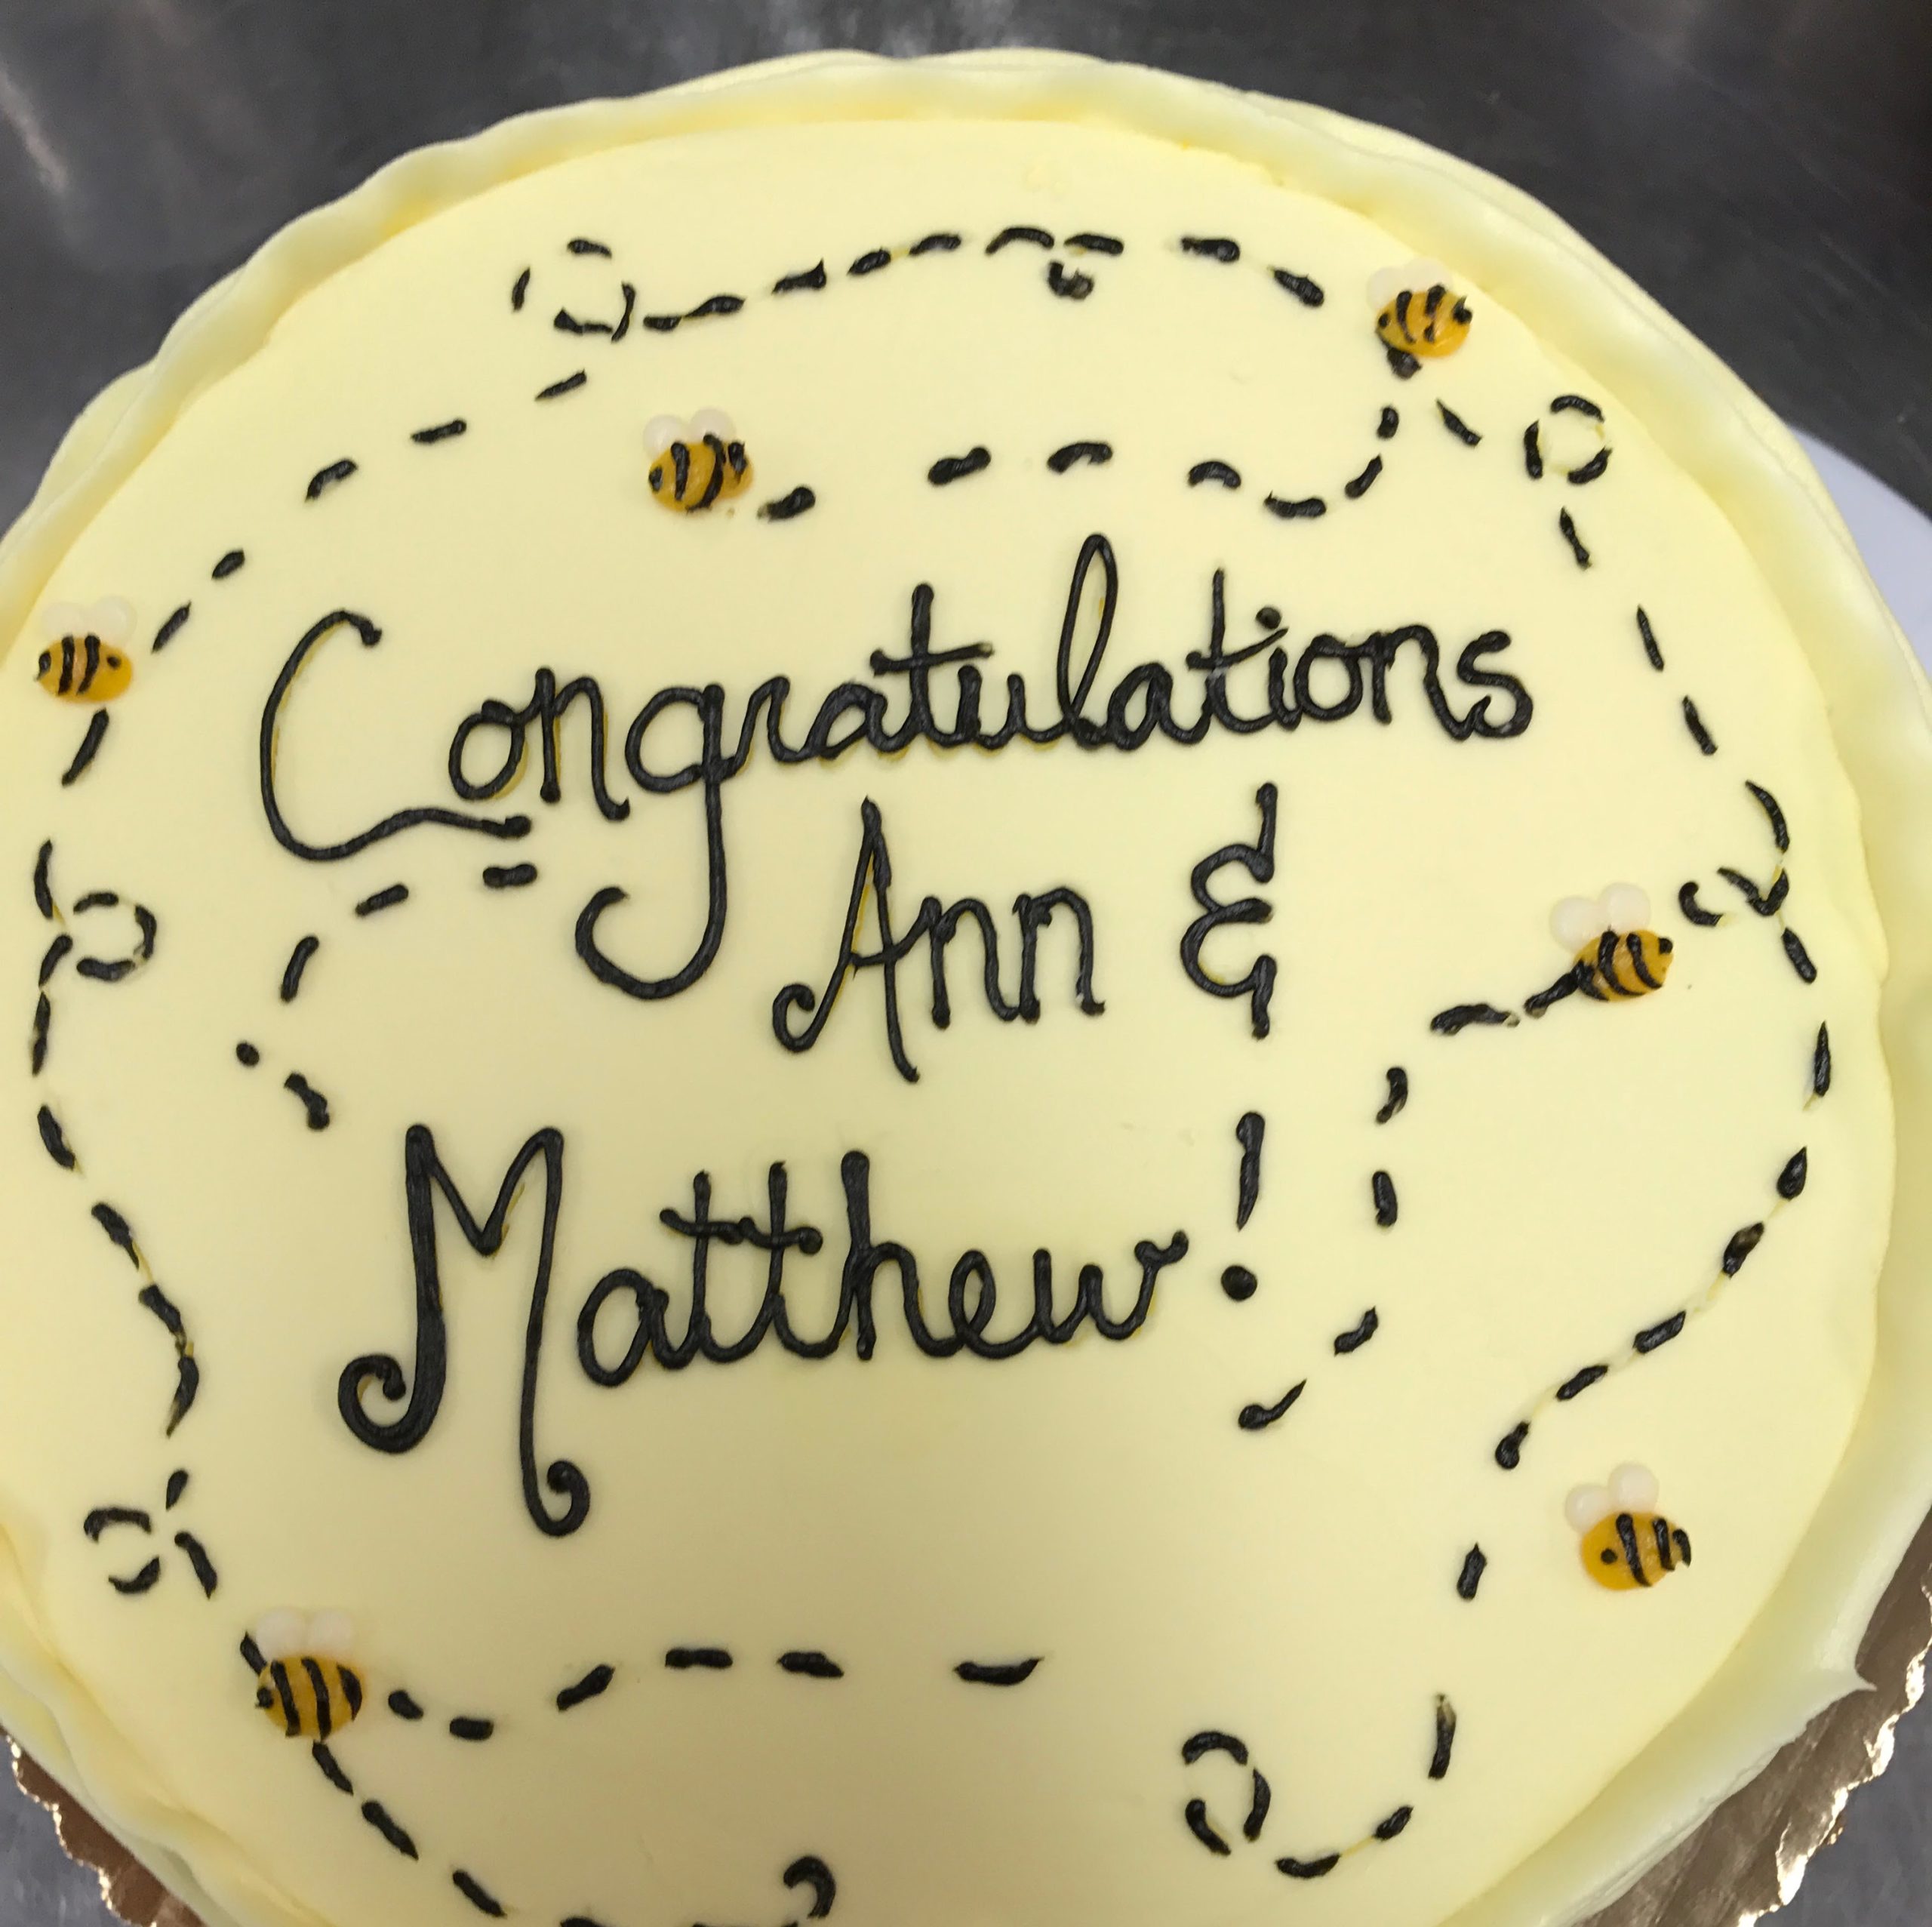 SAVE THE BEES BUZZ CUSTOM CAKE FOR ENGAGEMENT, KIDS AND ADULTS BIRTHDAYS, ANNIVERSARY, AND BABY SHOWER CELEBRATION PARTY CUSTOM CAKE IN CHICAGO